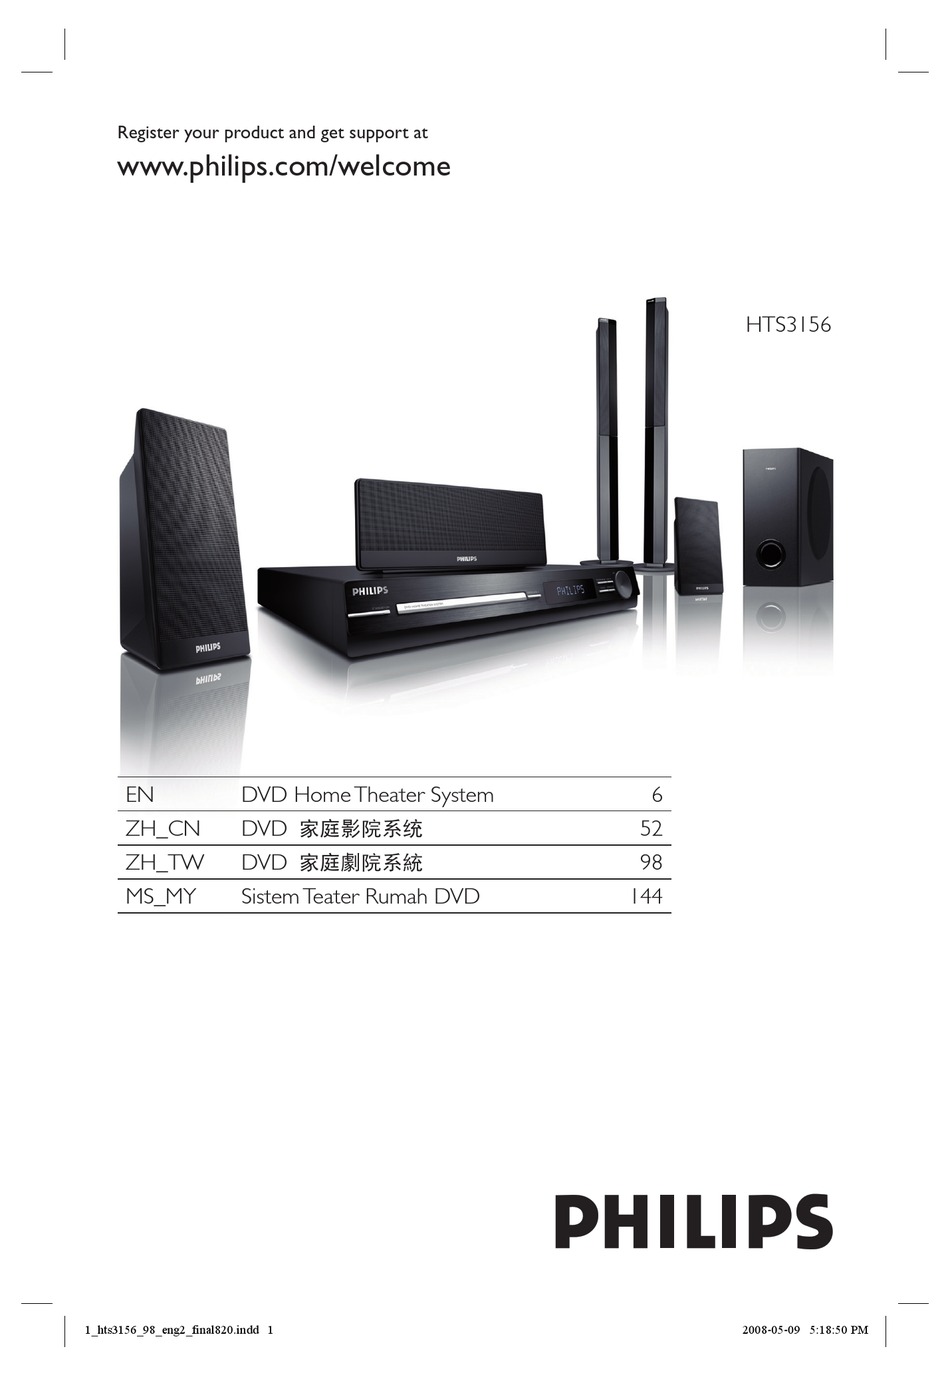 HTS3156 DVD home theater system